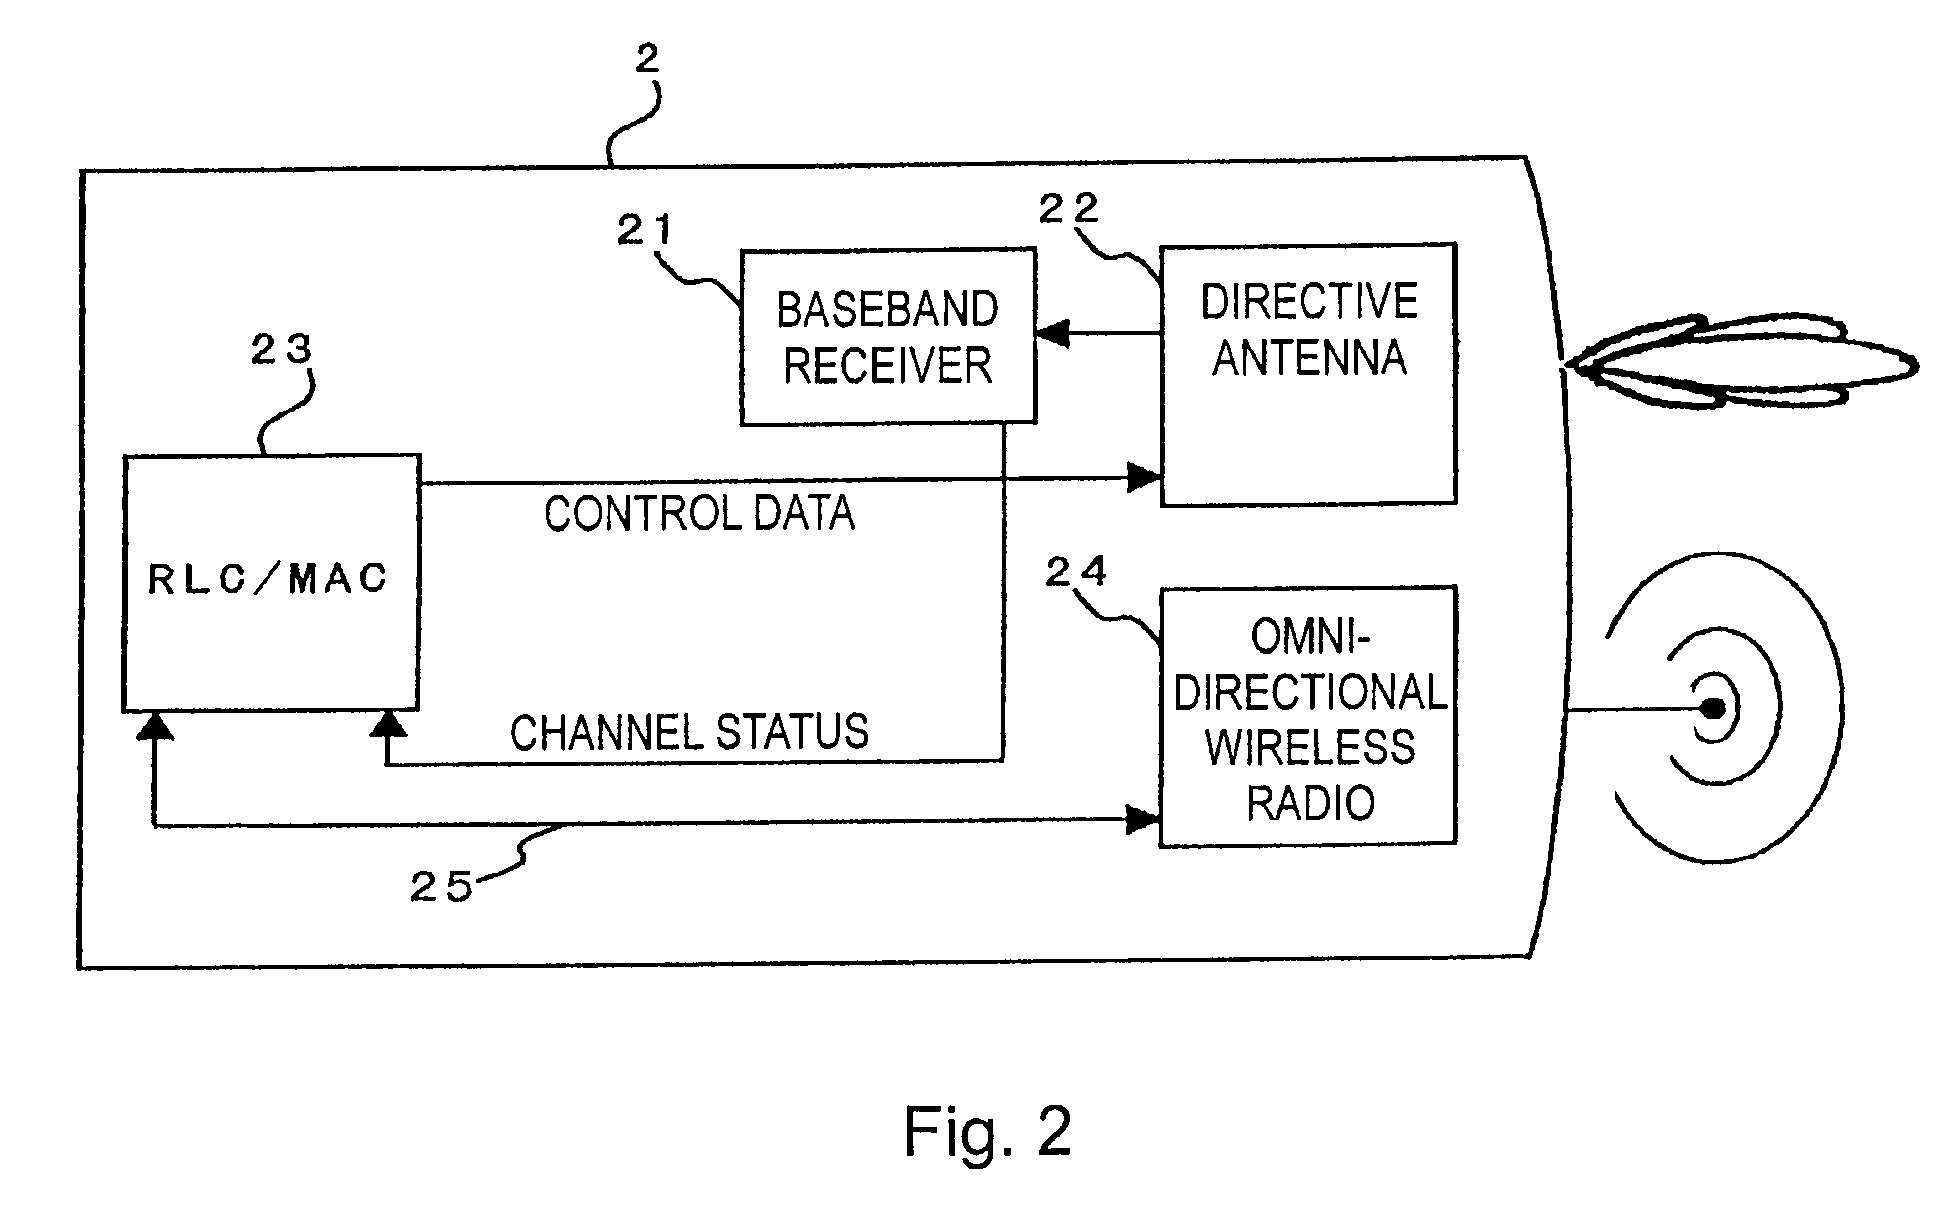 Out-of-band radio link protocol and network architecture for a wireless network composed of wireless terminals with millimetre wave frequency range radio units